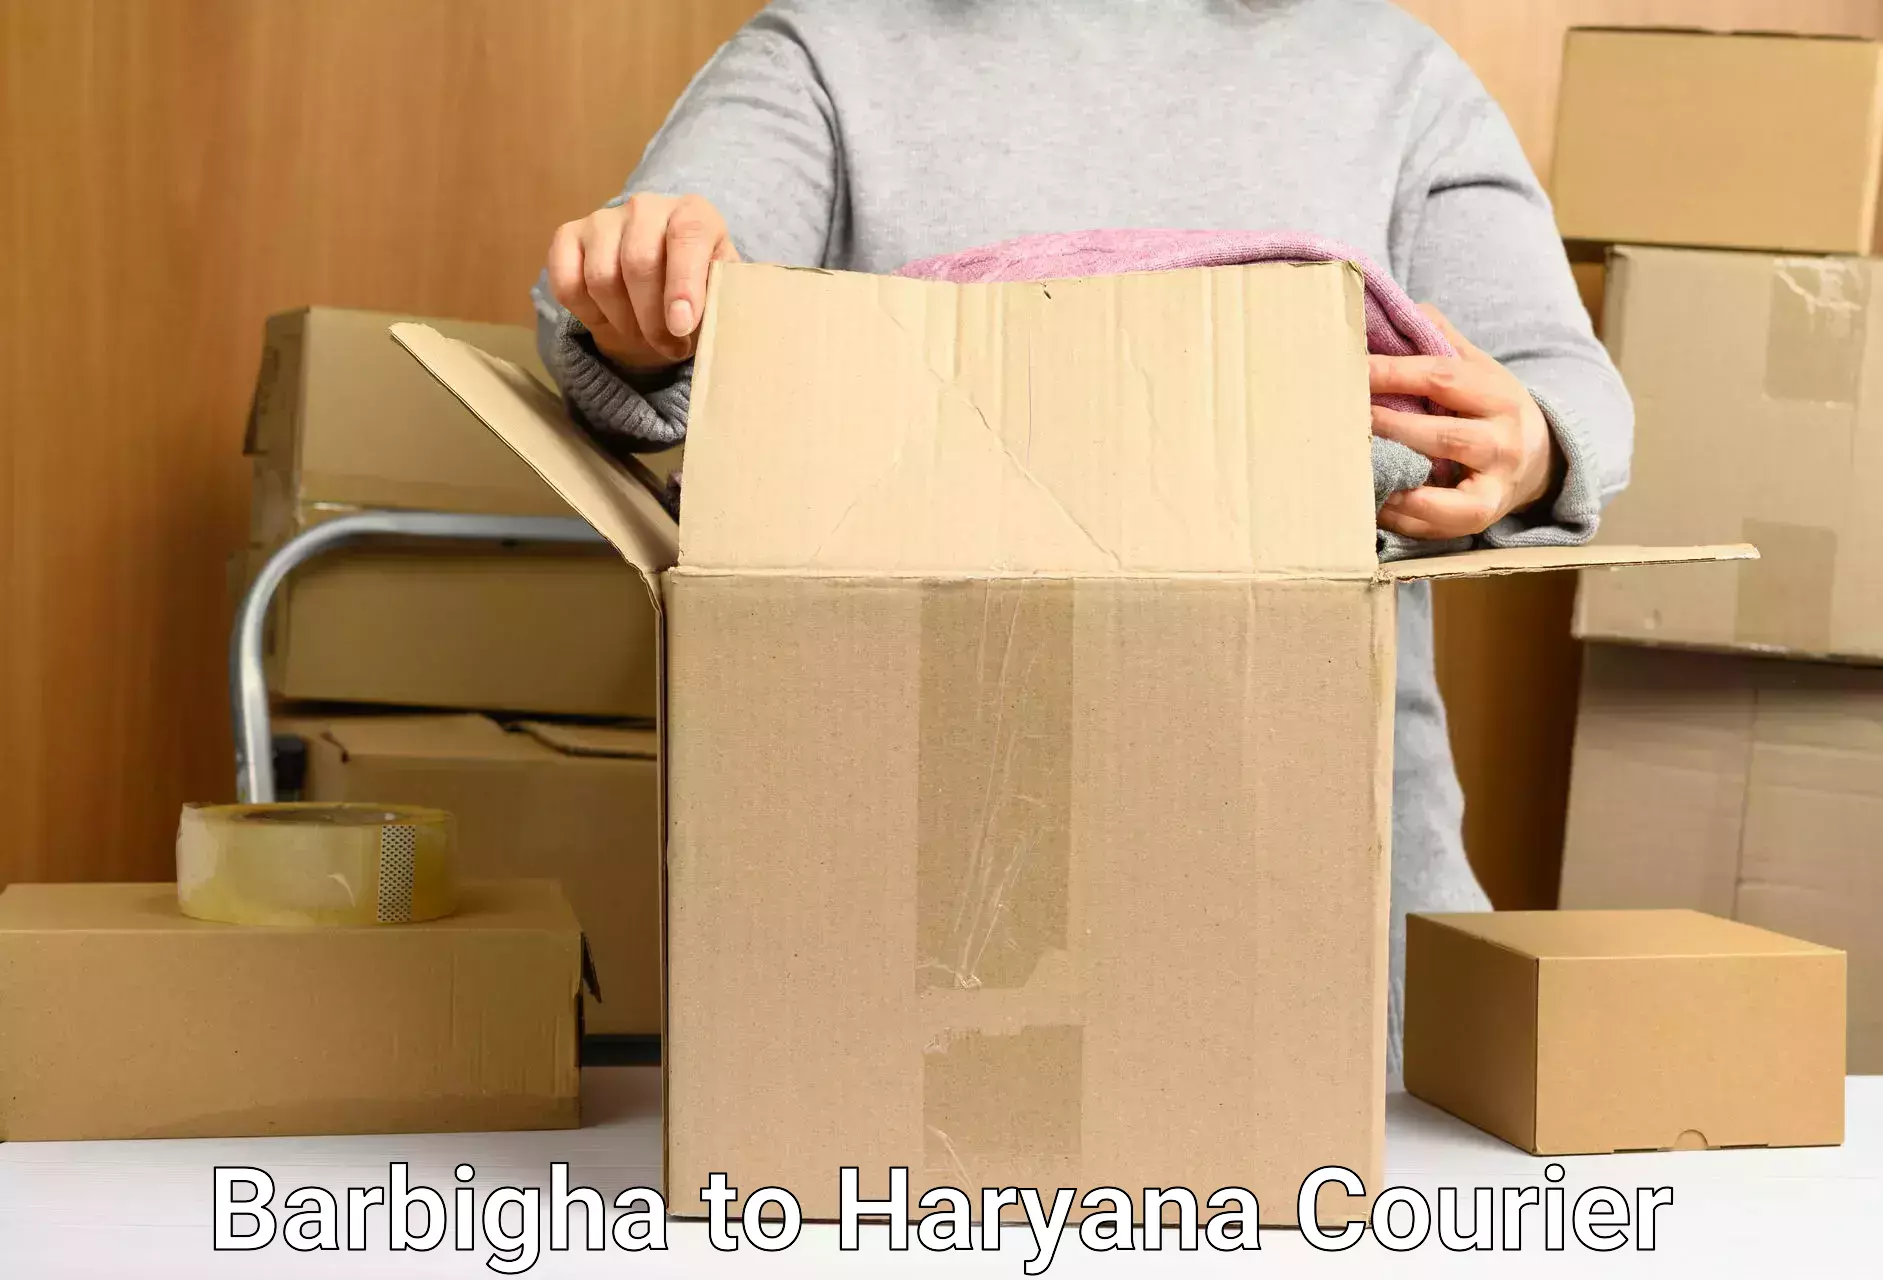 Express delivery network Barbigha to Haryana